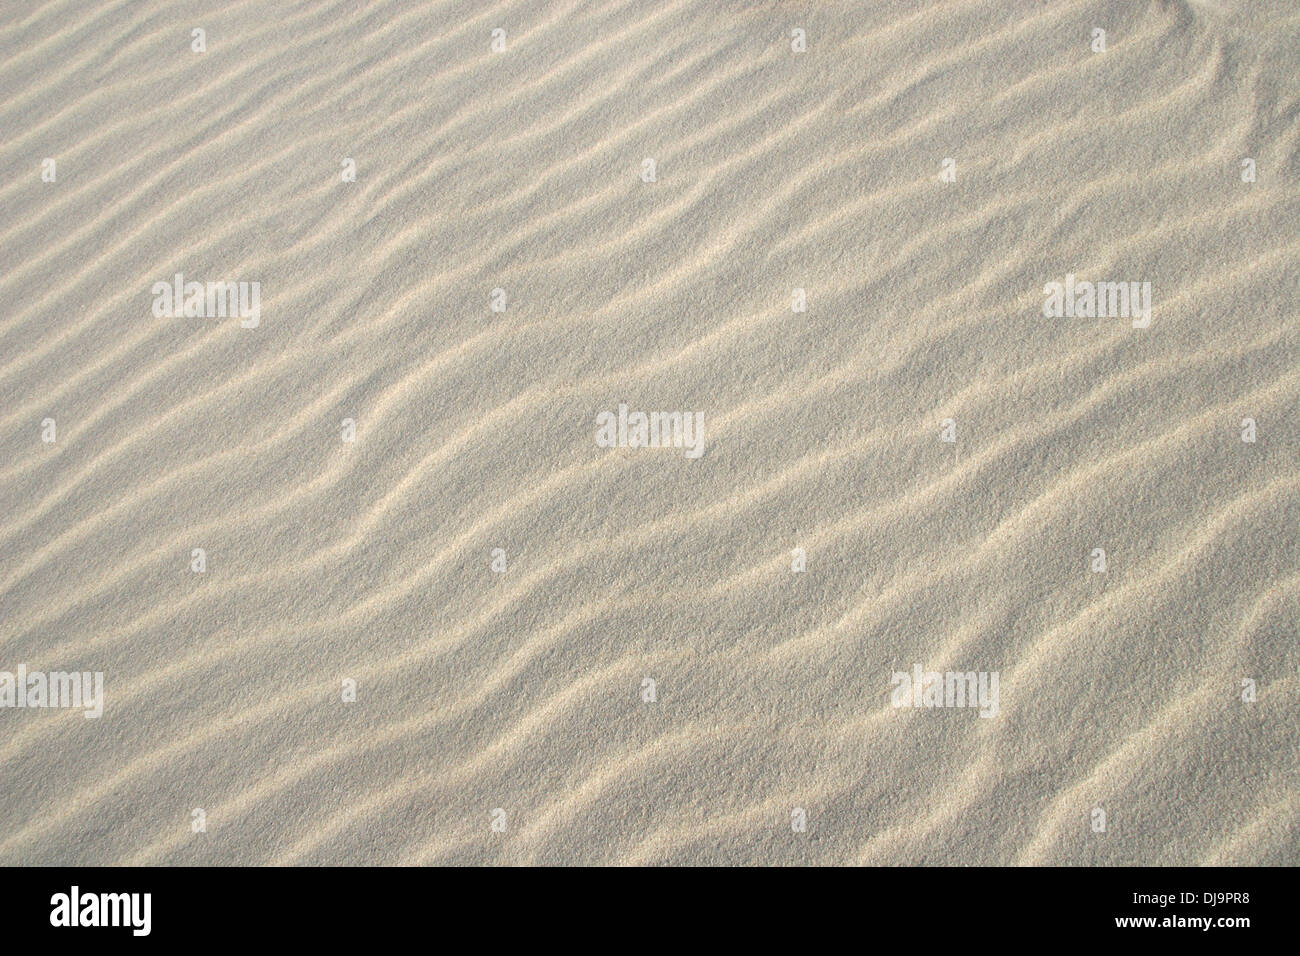 Close up of sand on a beach, showing the natural ripples. Stock Photo